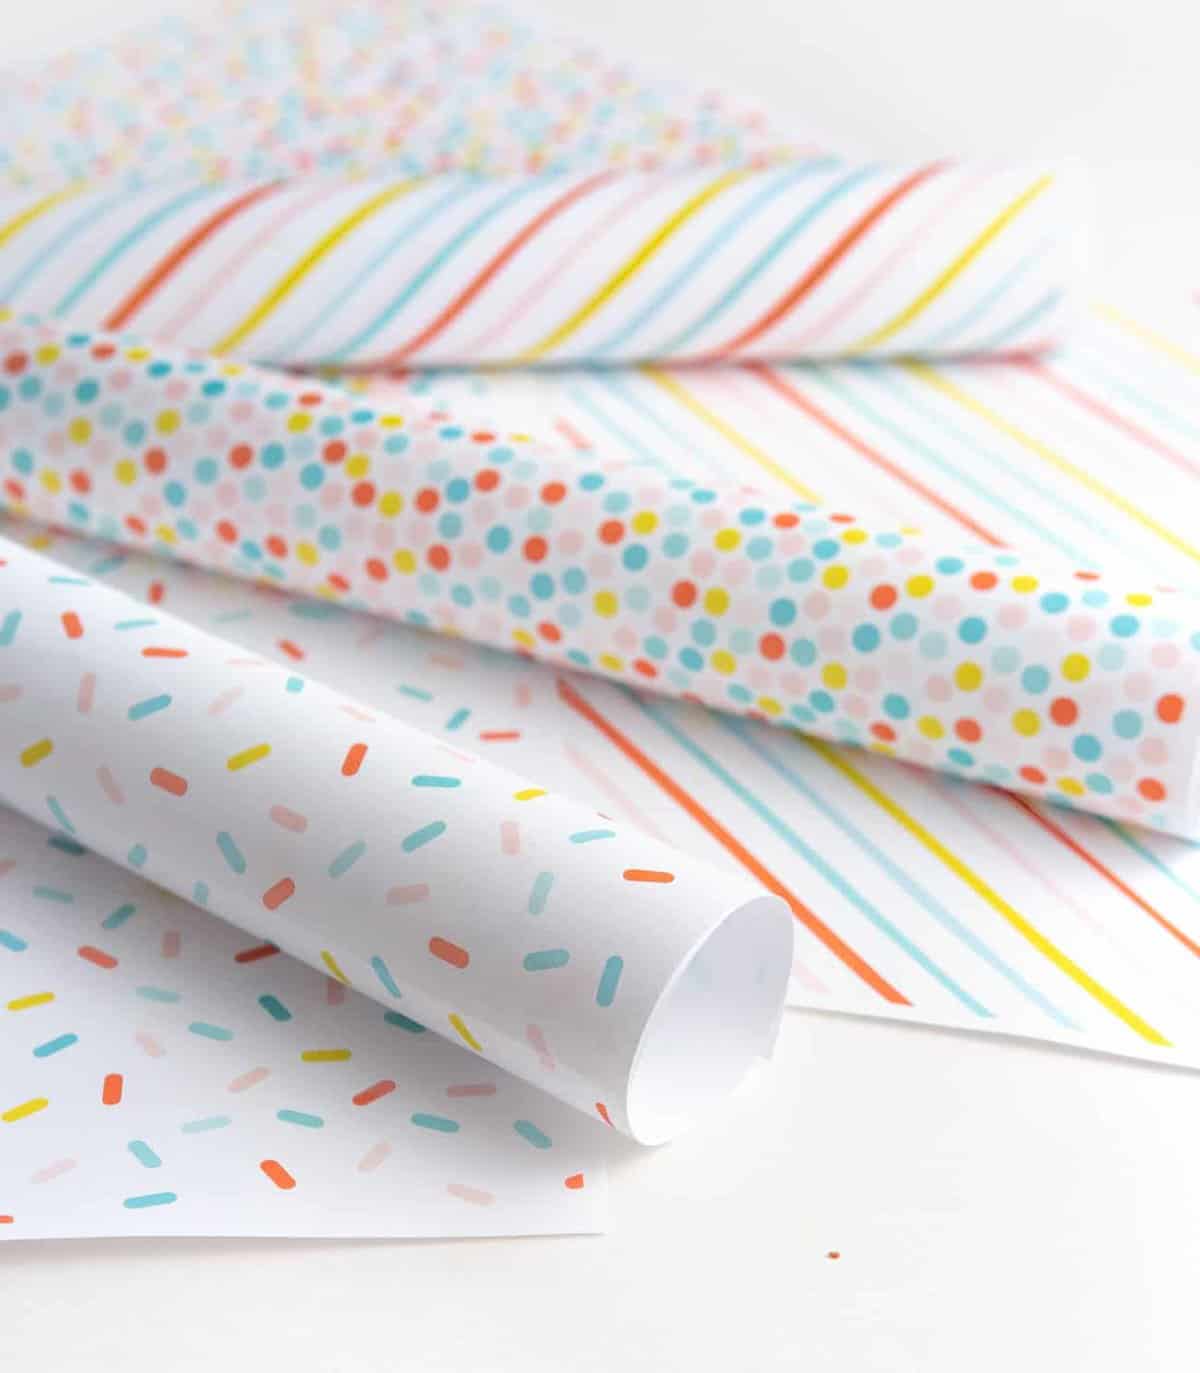 Rainbow Question Wrapping Paper Sheet Gift Book Cover Birthday Decoration White 